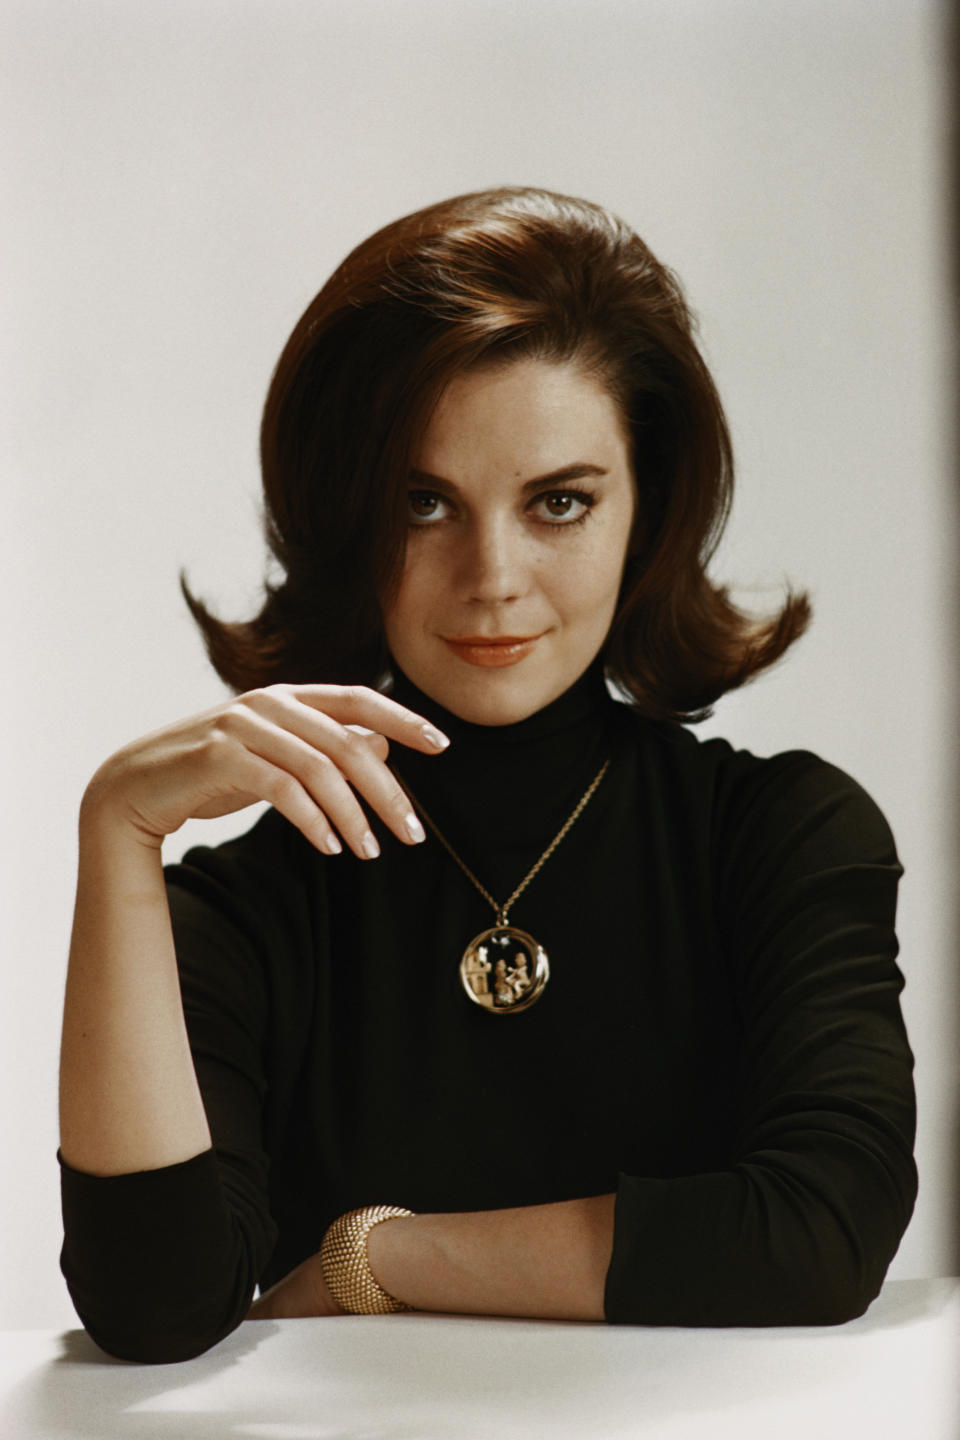 The actress wears a black turtleneck in this photo from the early '60s.&nbsp;